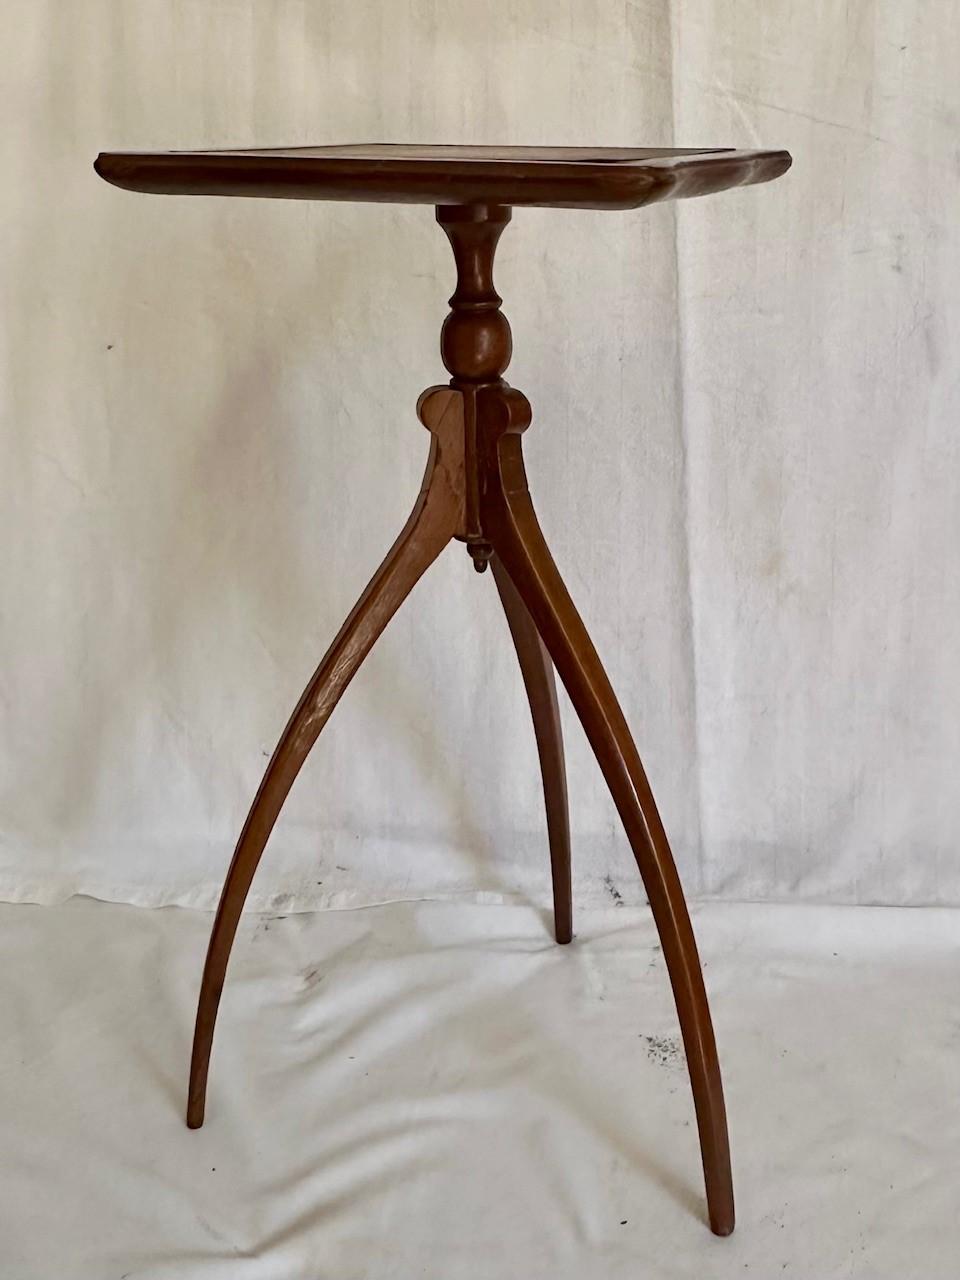 American Vintage Shaker Style Spider Leg Candle Stand. For Sale